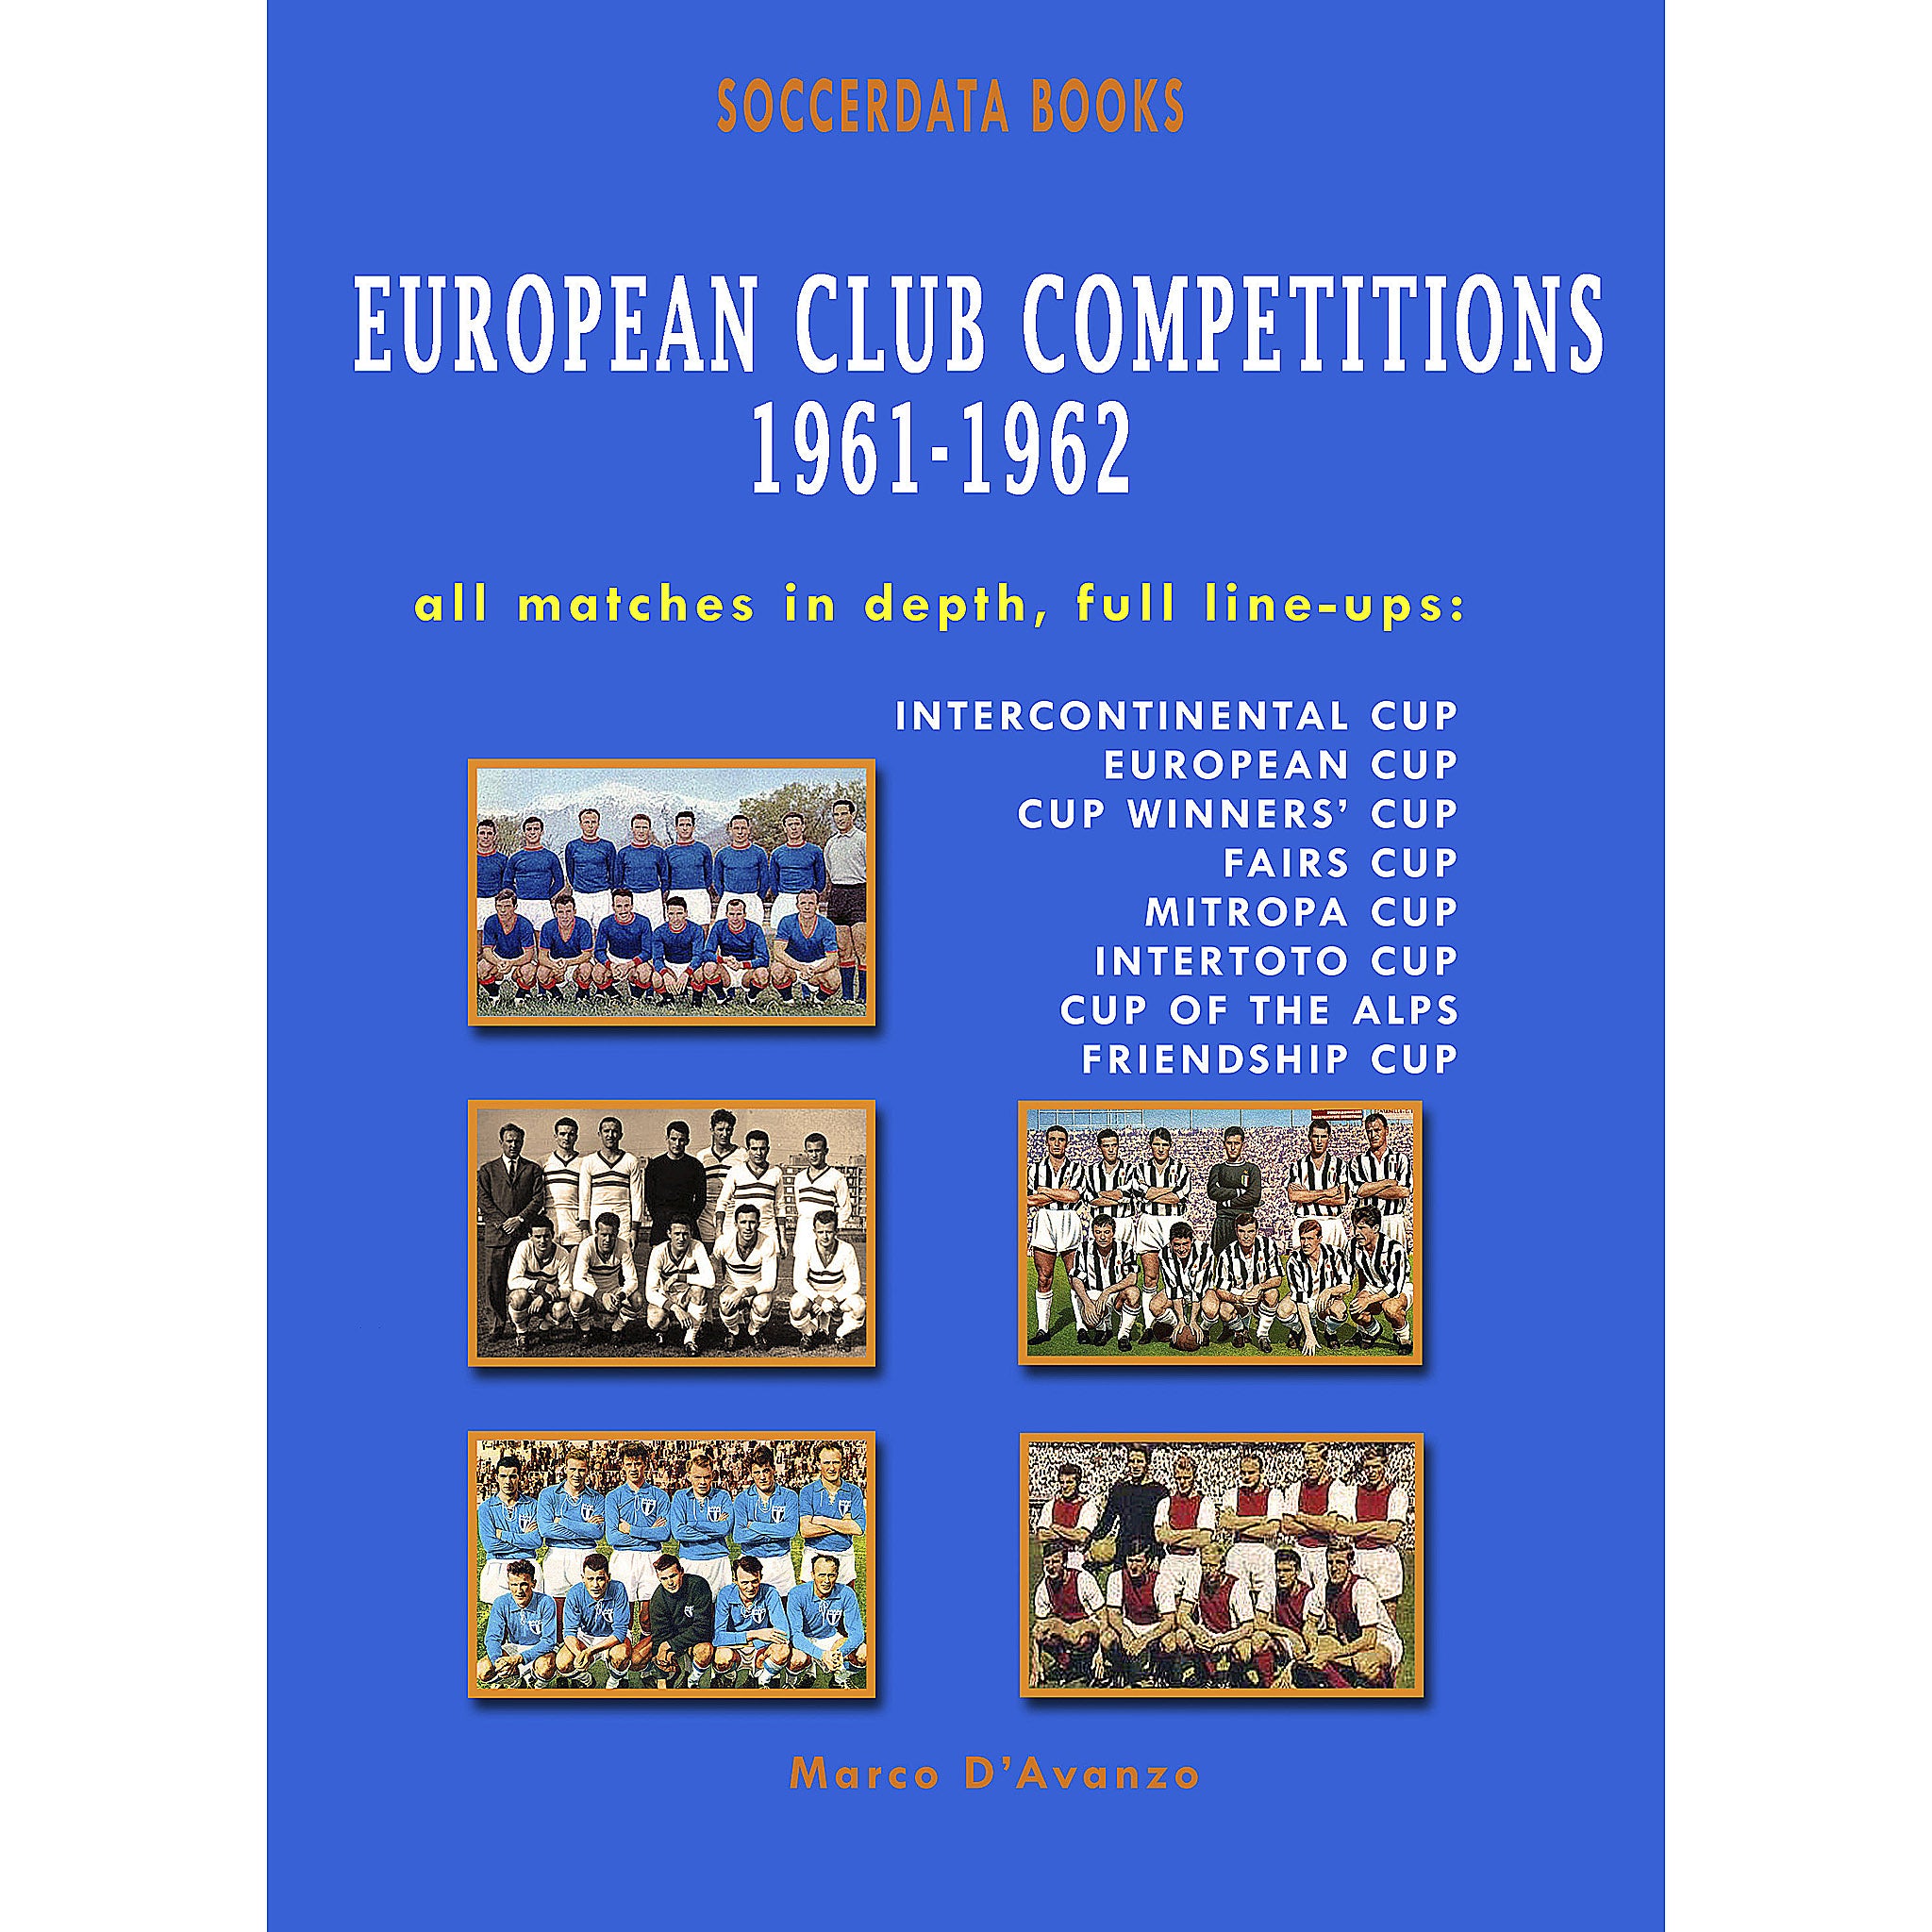 European Club Competitions 1961-1962